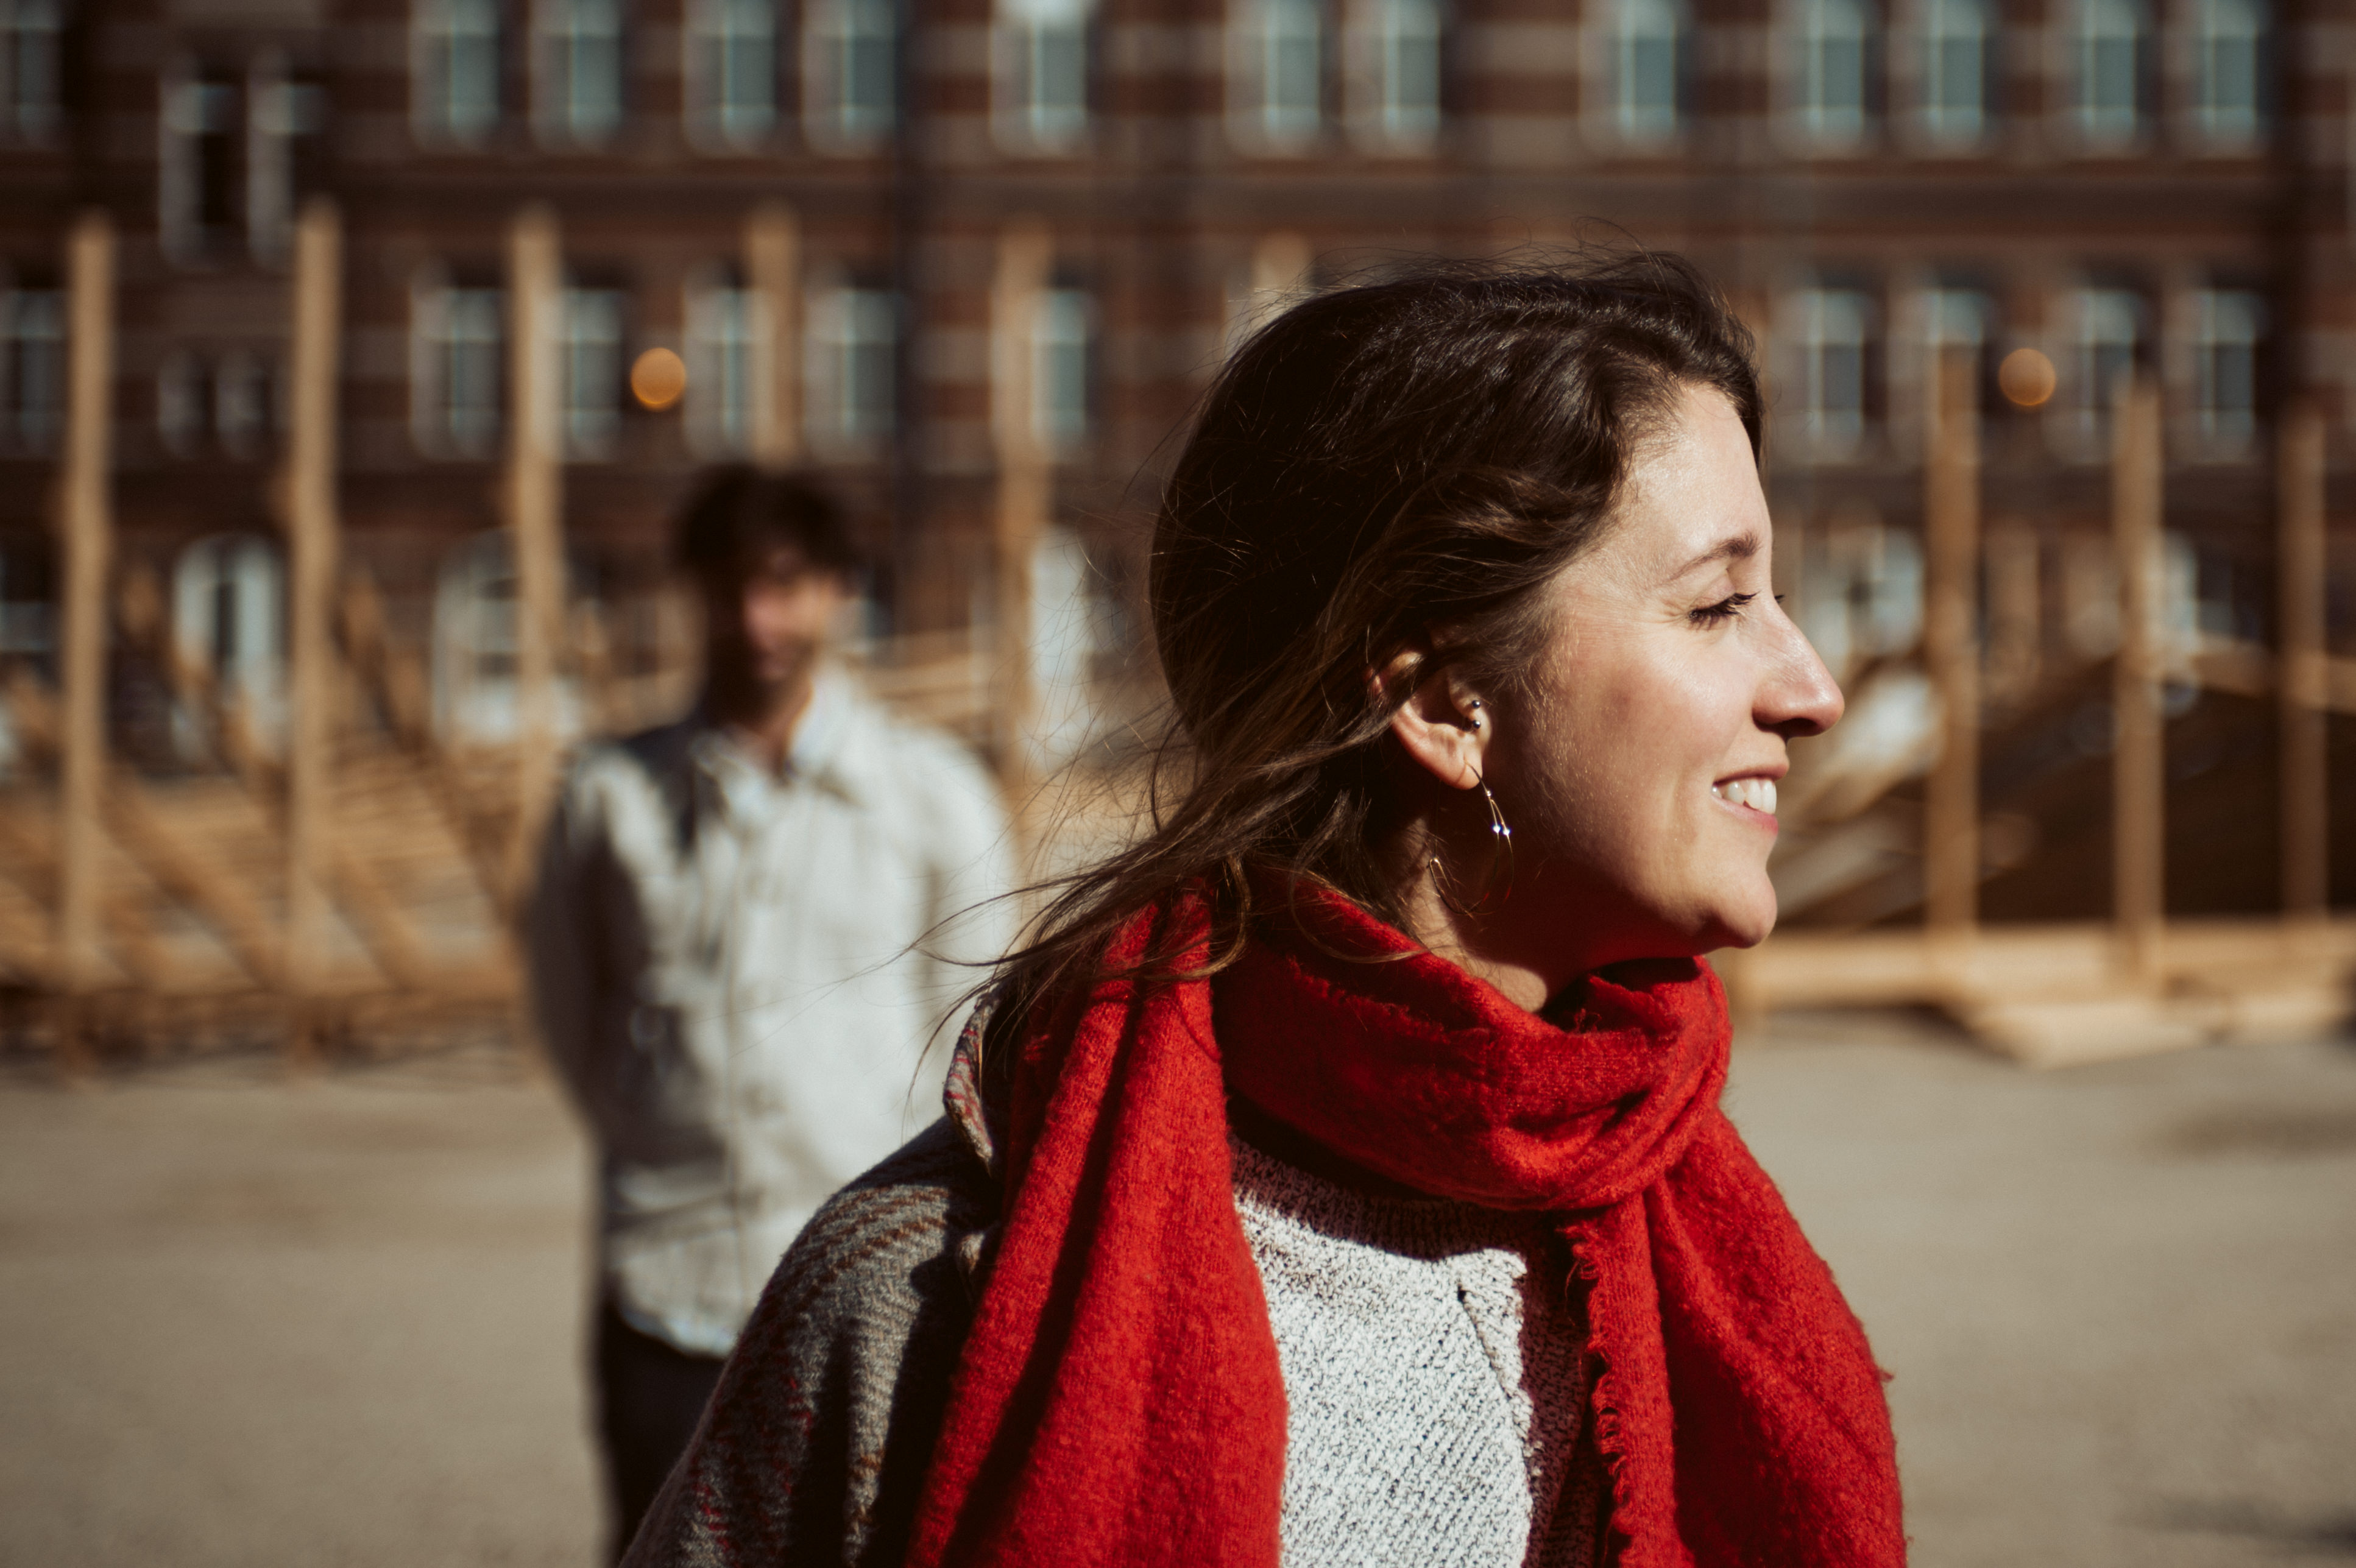 Brussels Engagement Session - girlfriend staring at the sun, he's int he background